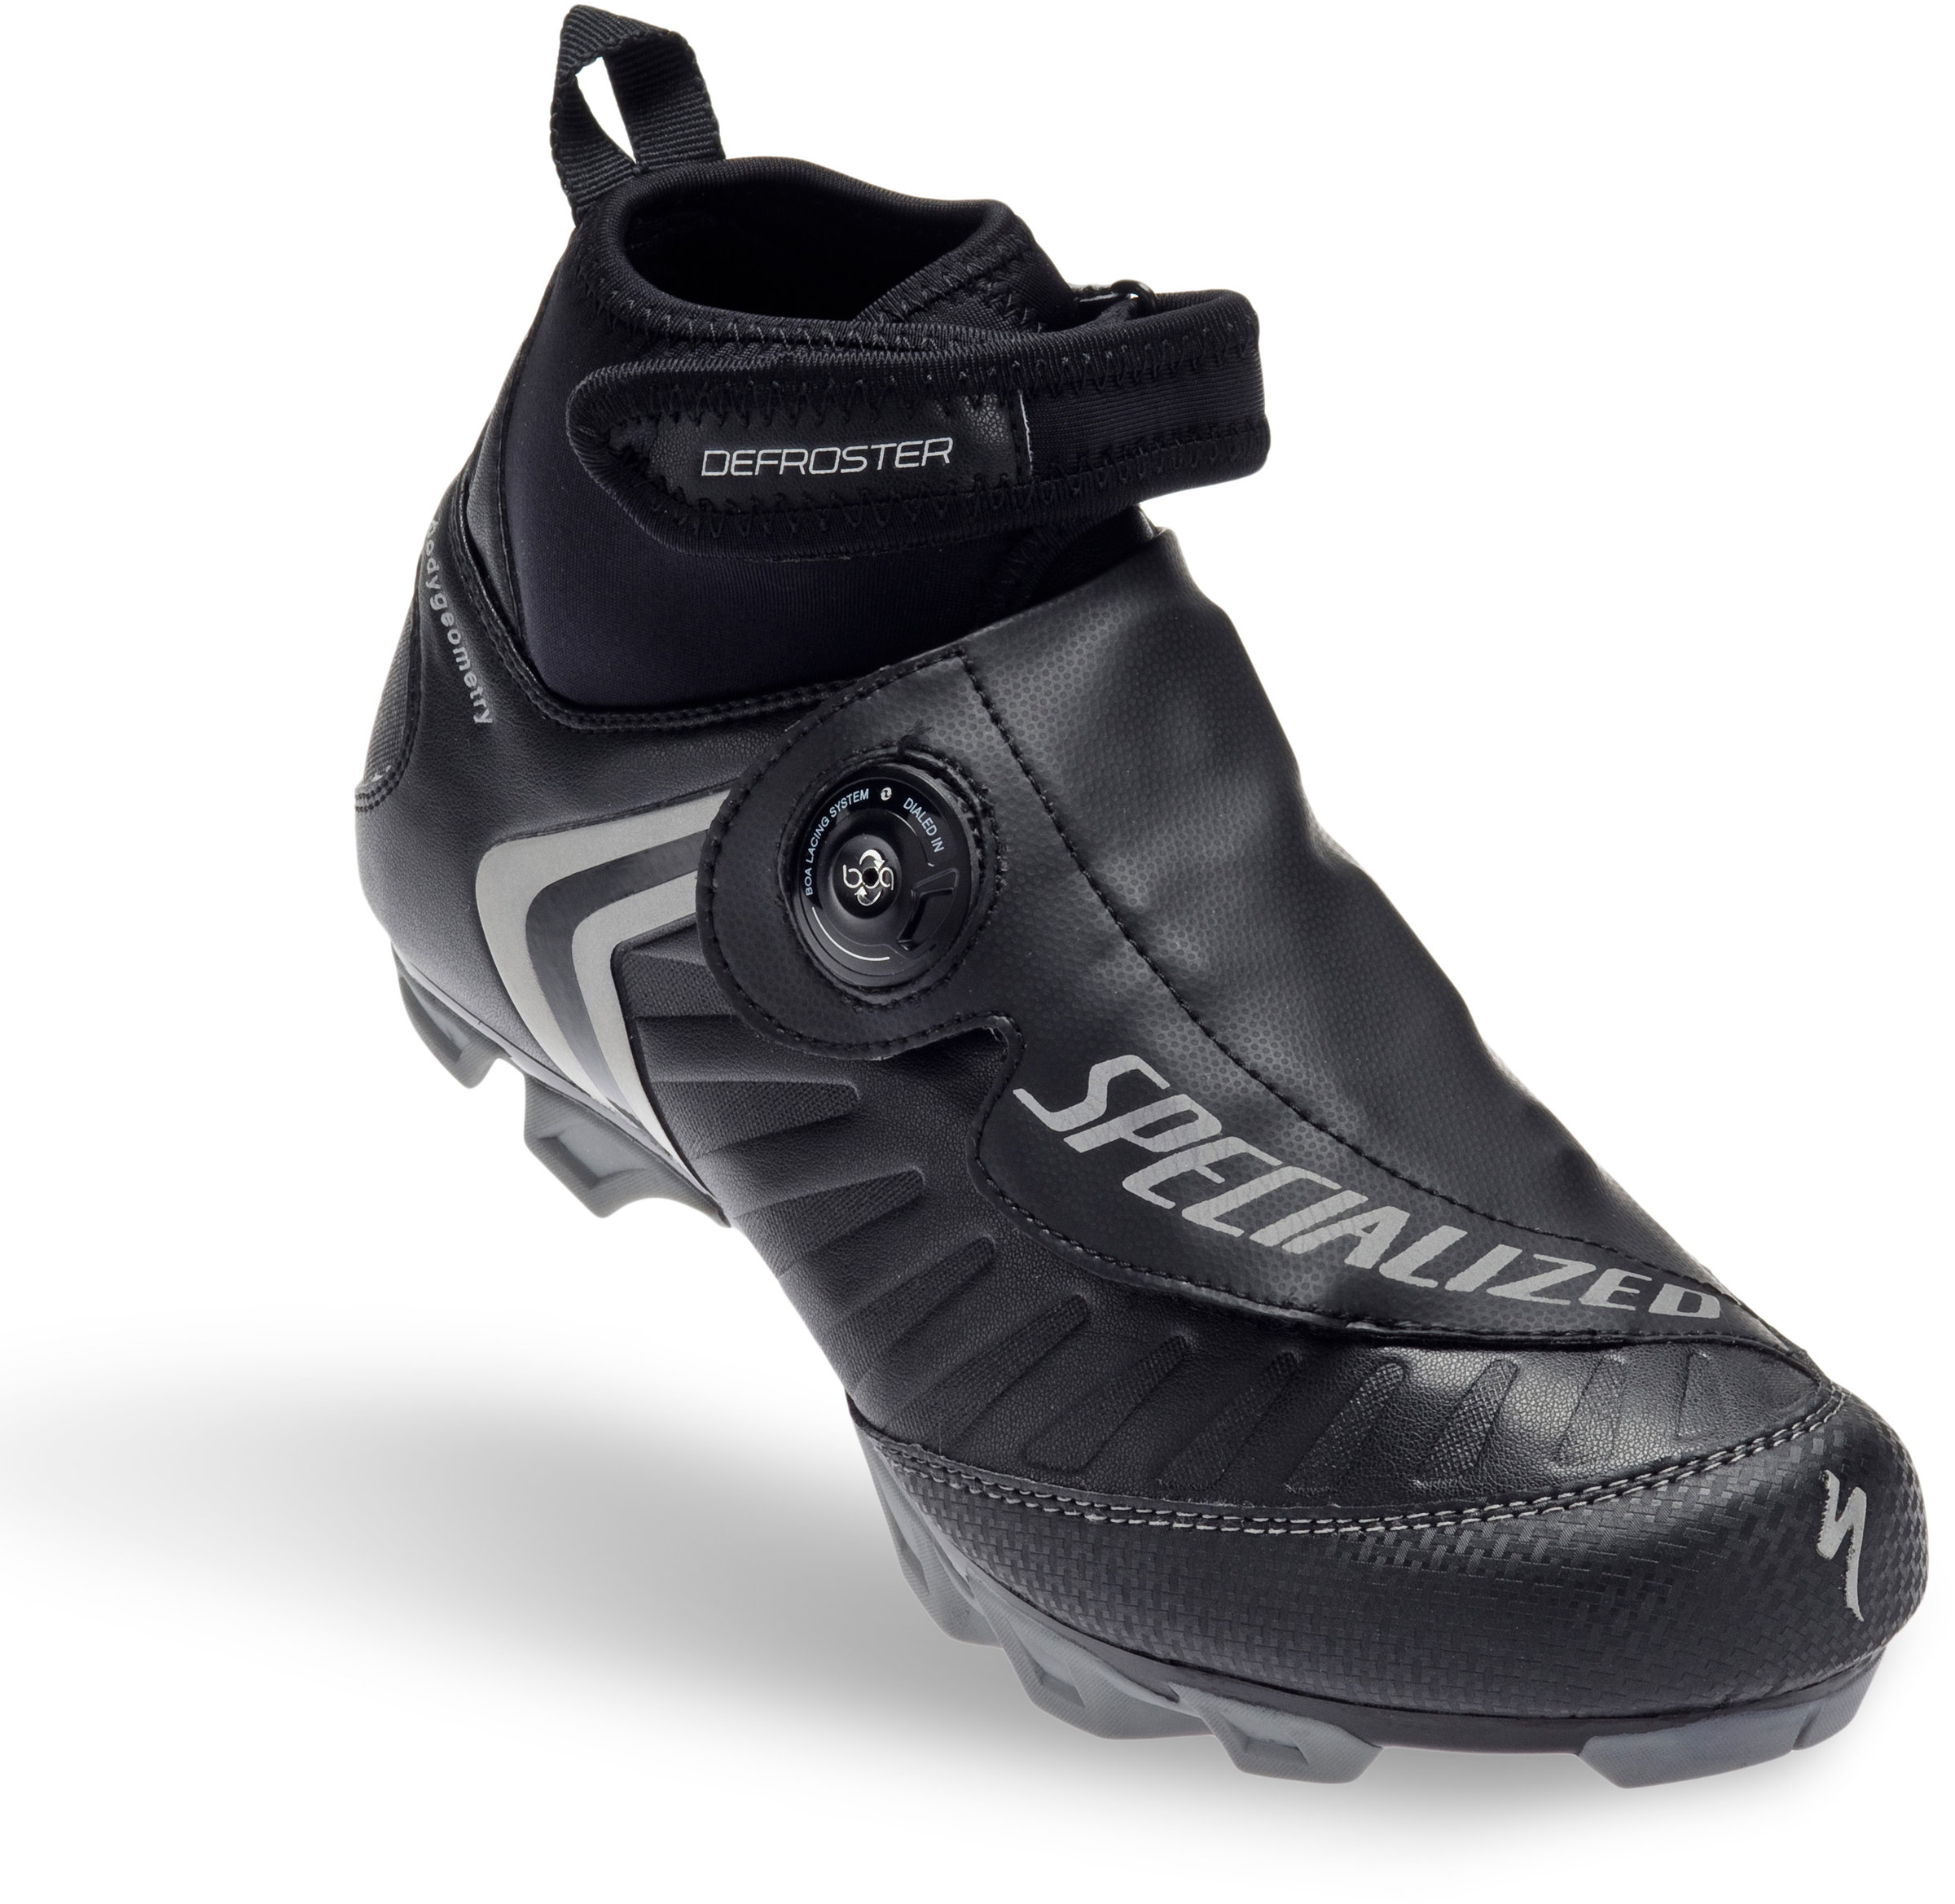 specialized defroster road shoe